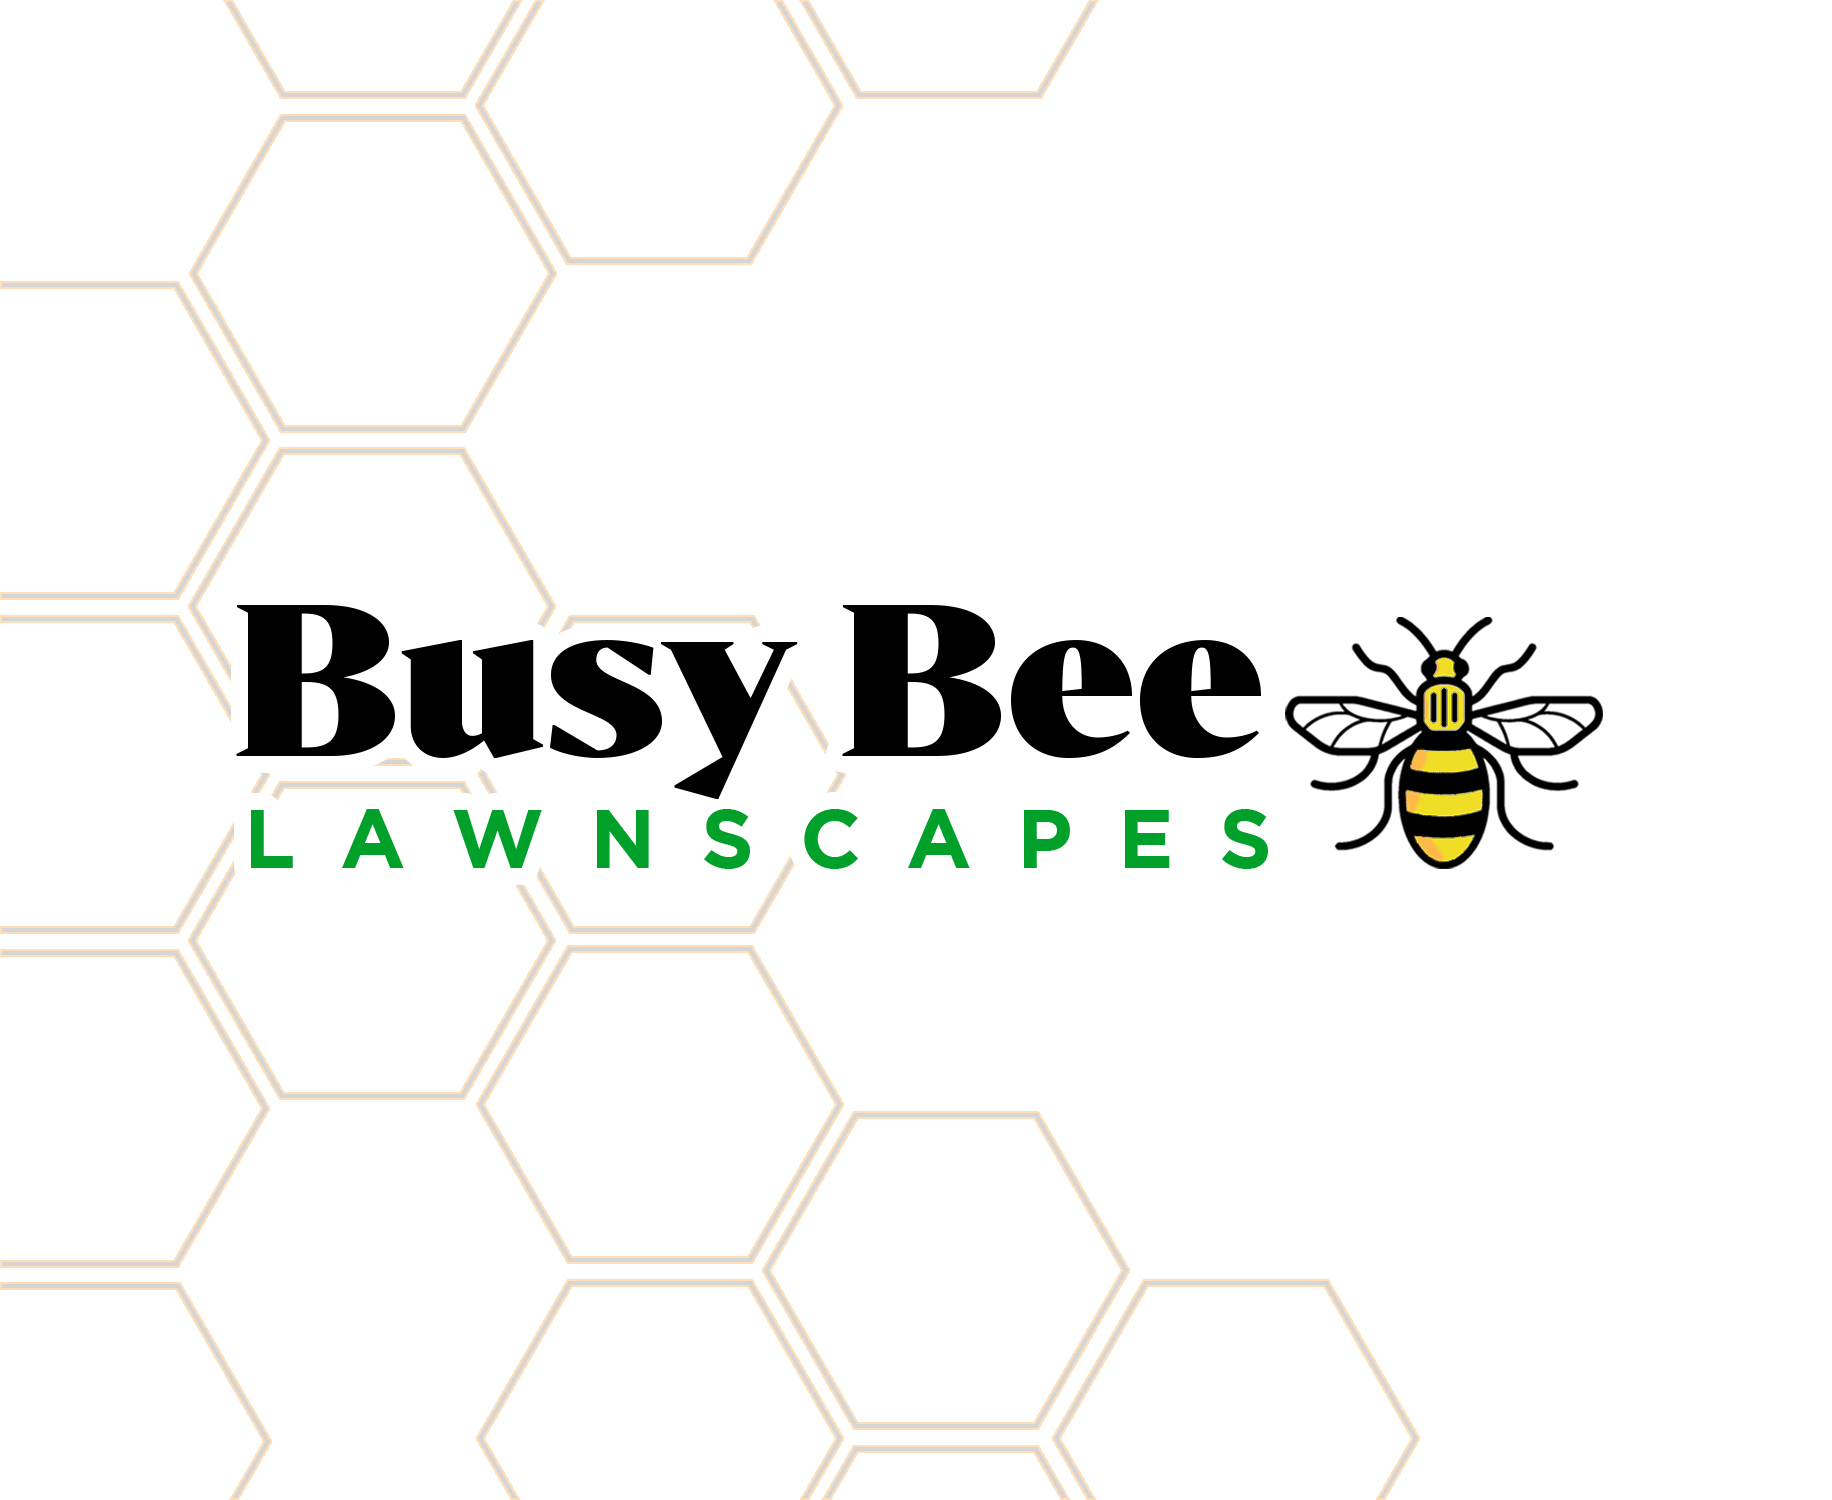 Busy Bee Lawnscapes Logo